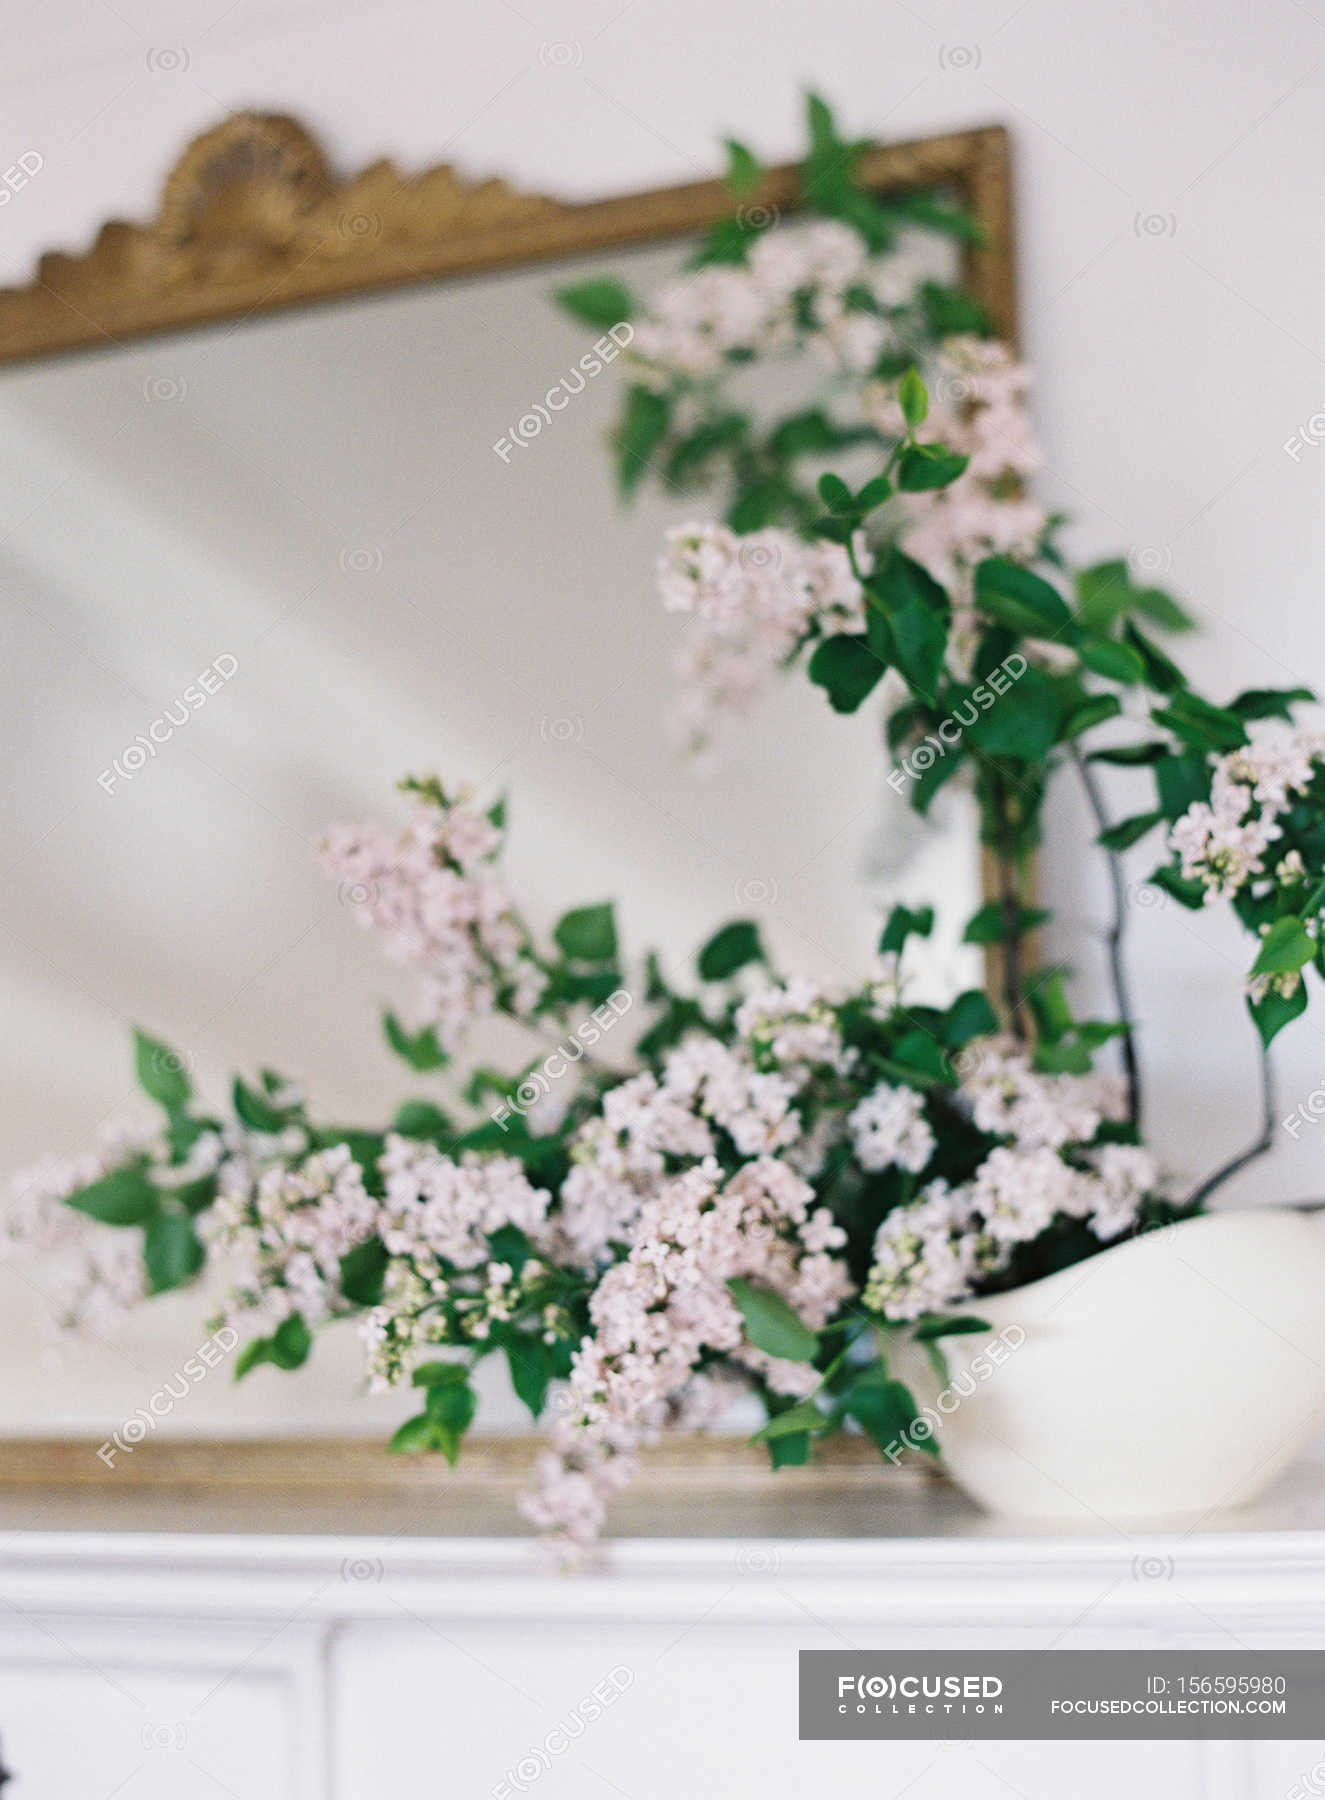 Fresh lilac flowers in vase — Stock Photo | #156595980